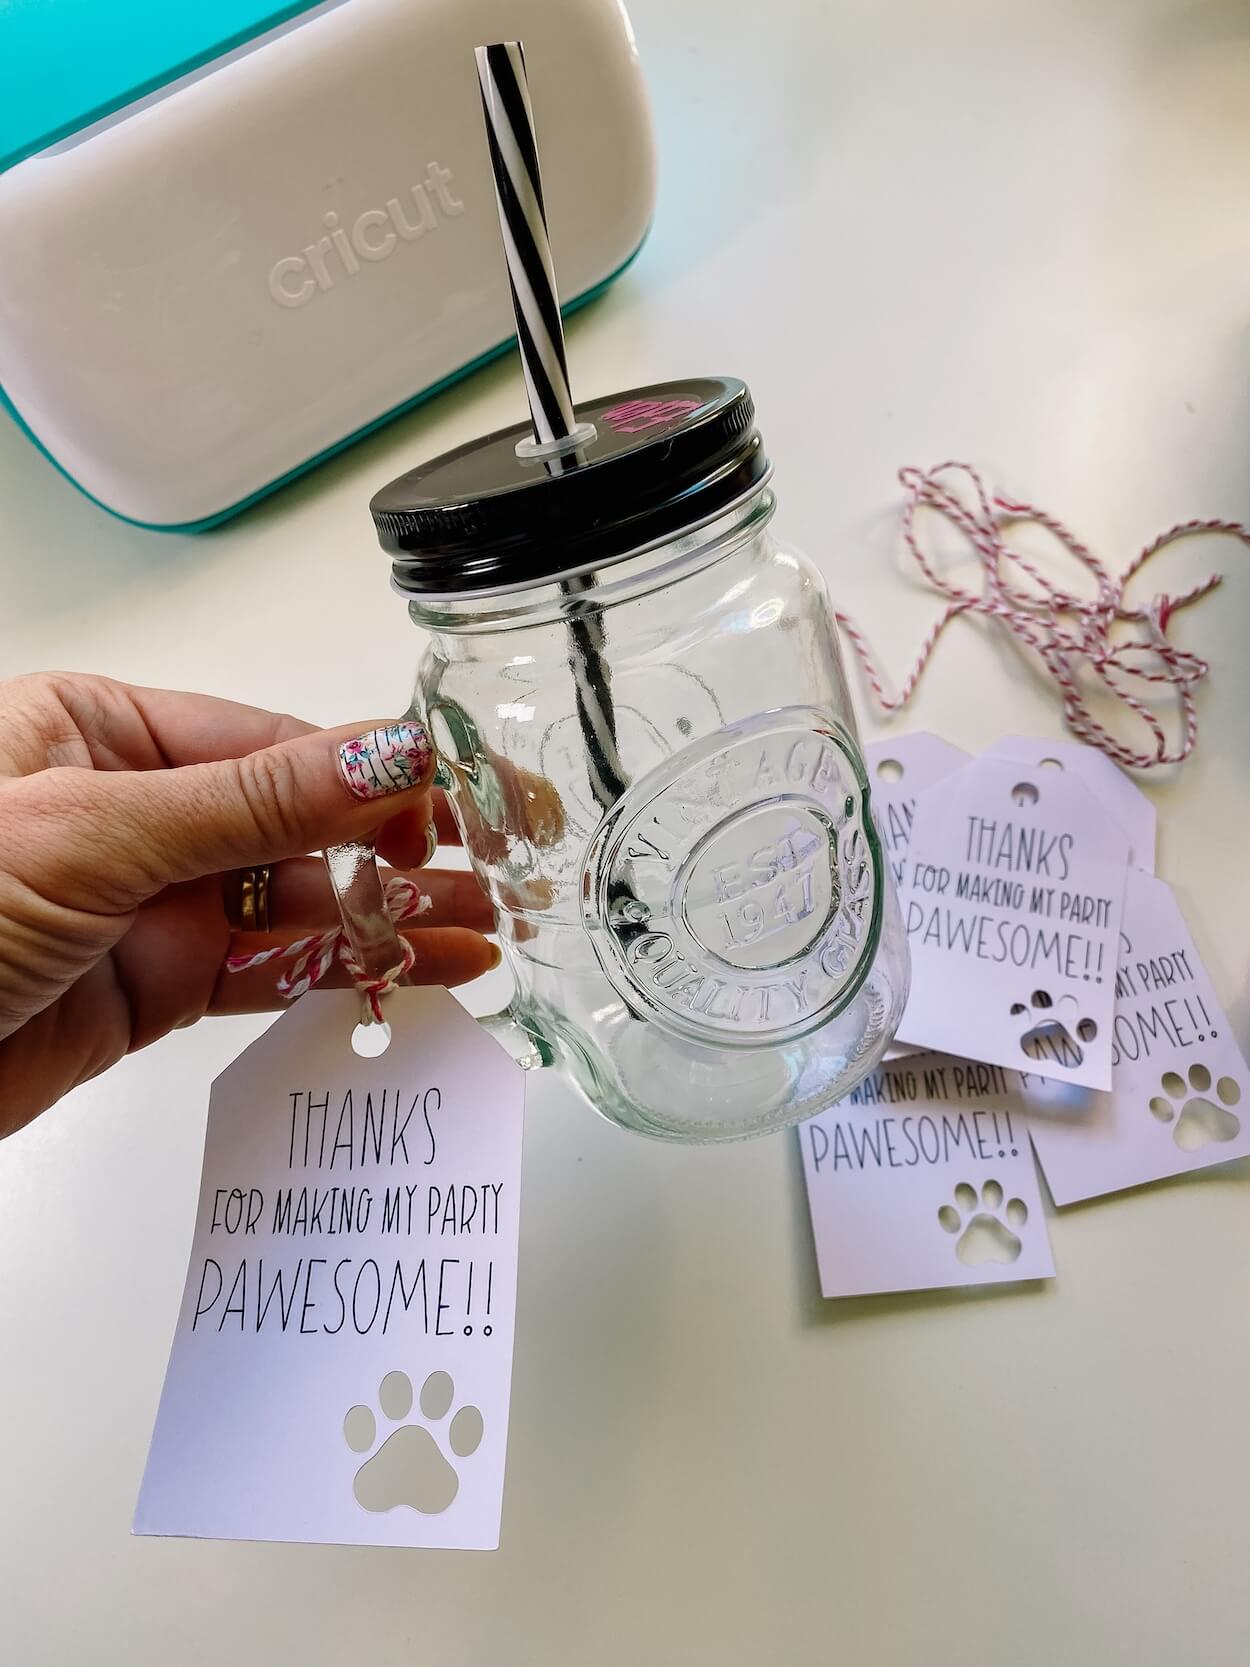 Hand holding a glass drink jar with black lid with a gift tag, with visible gift tags and cricut machine in background.